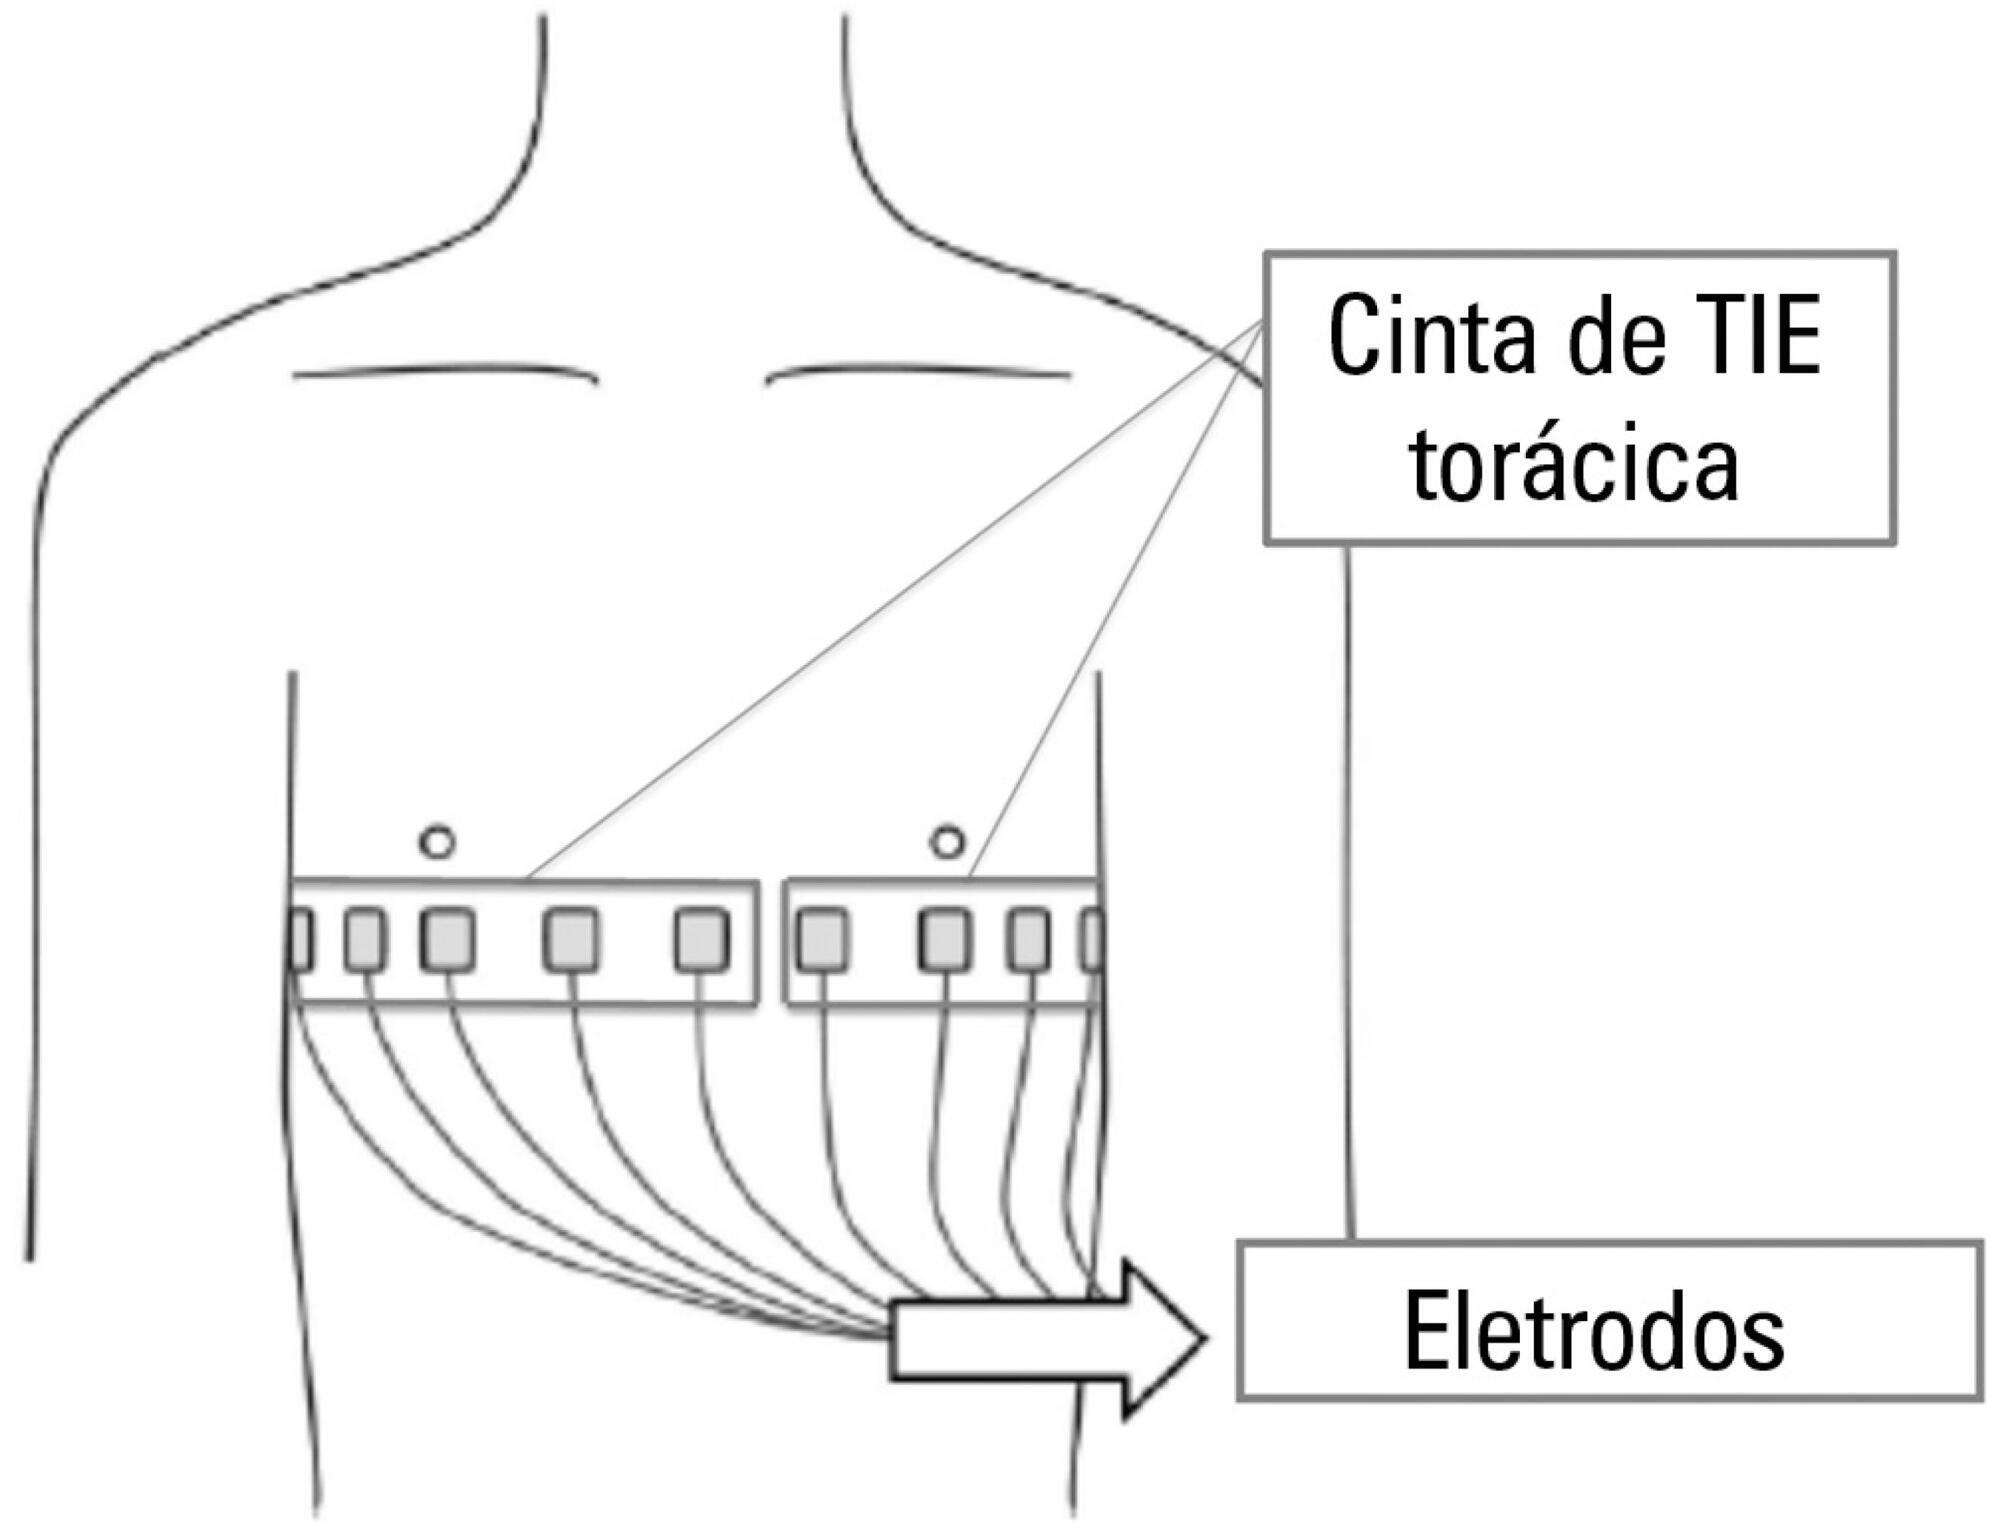 Use of thoracic electrical impedance tomography as an auxiliary tool for alveolar recruitment maneuvers in acute respiratory distress syndrome: case report and brief literature review